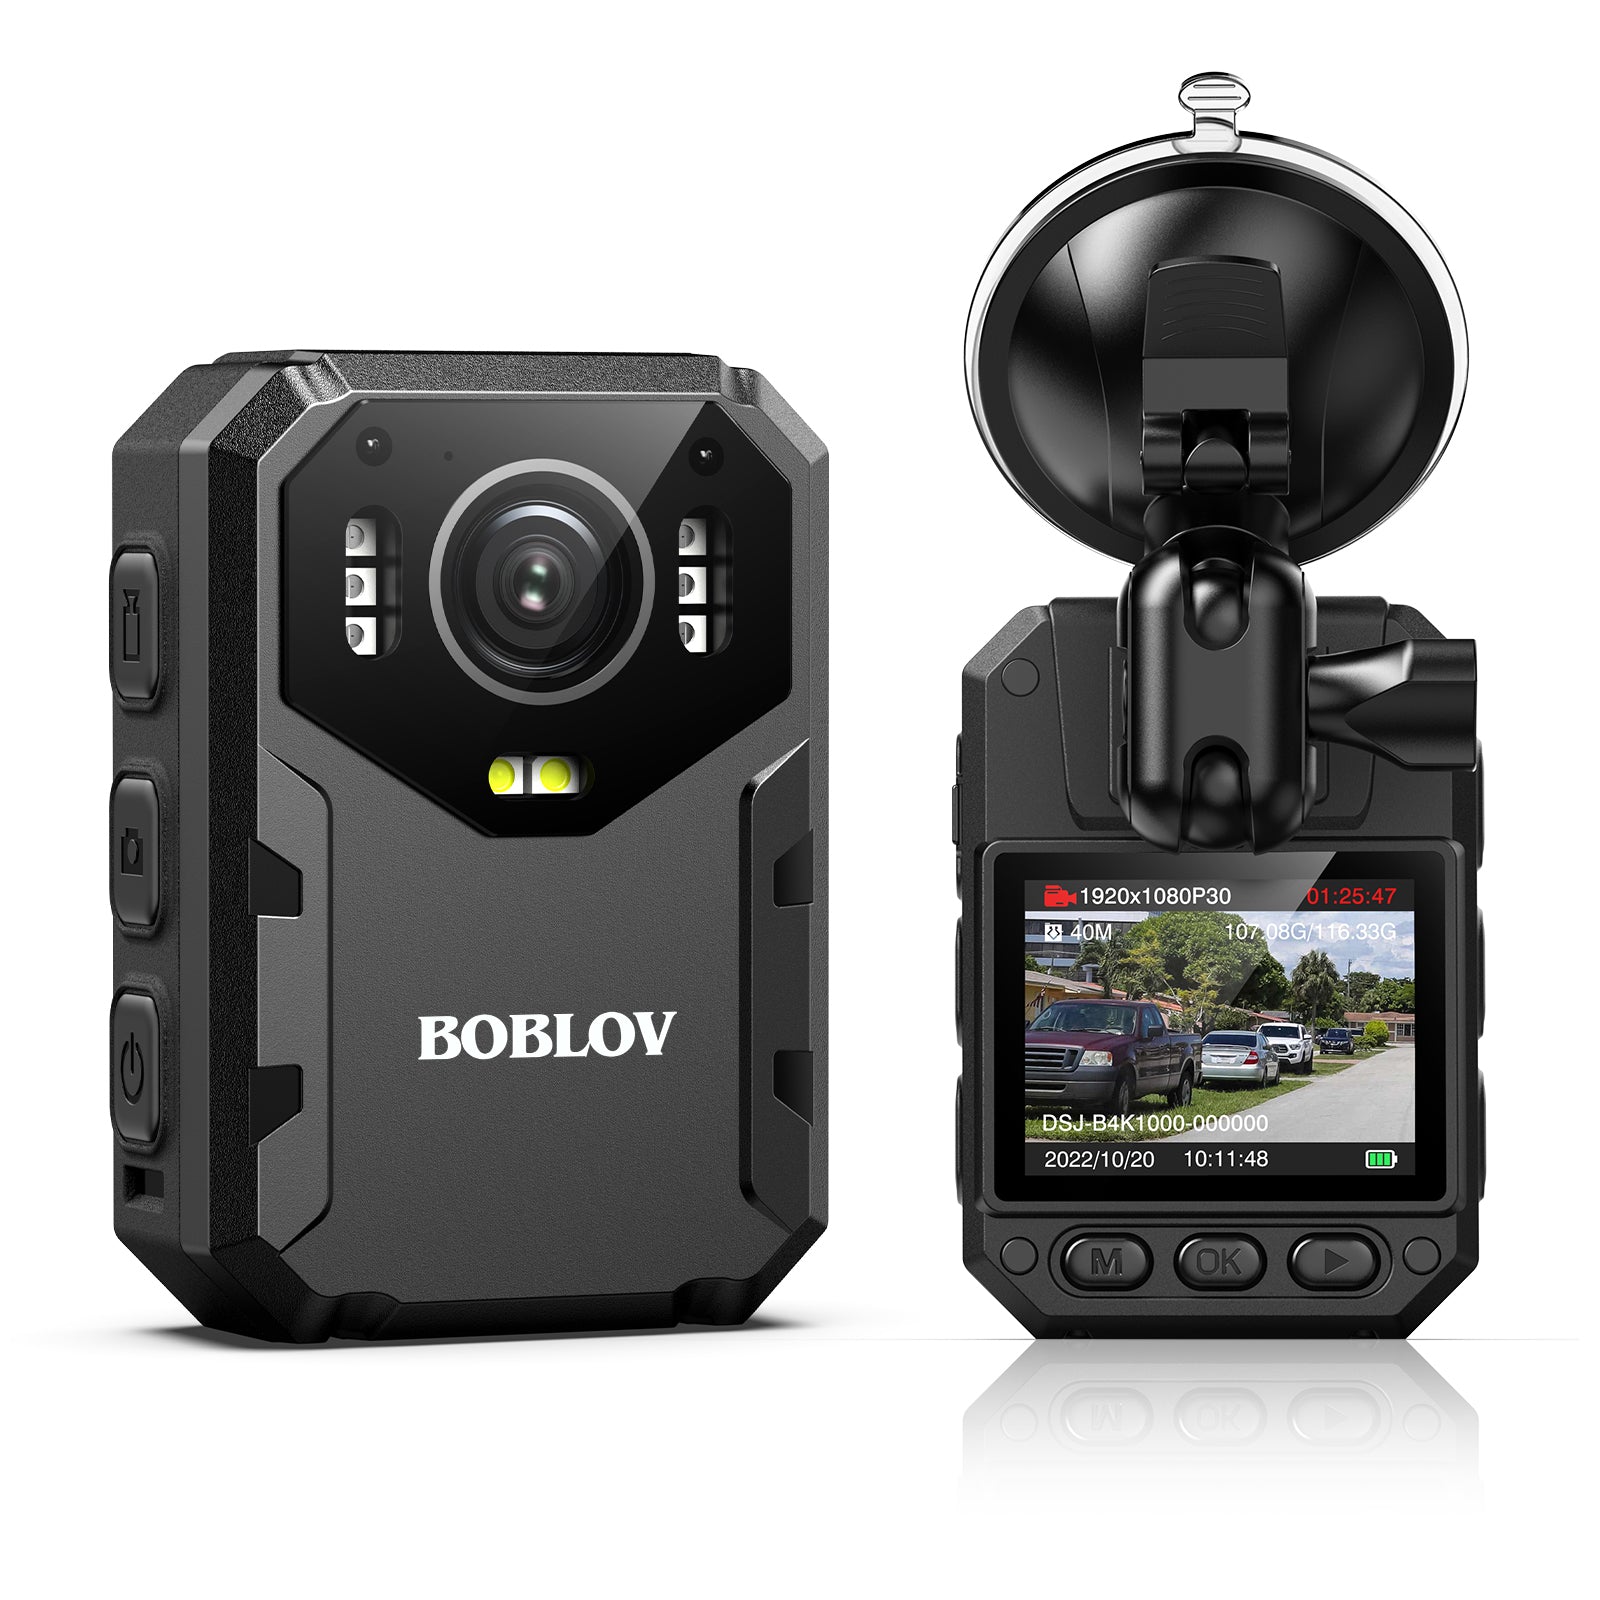 BOBLOV B4K1 128GB 4K body camera with GPS and 3100mAh battery for extended 10-12 hours shooting, includes car suction mount and charger3